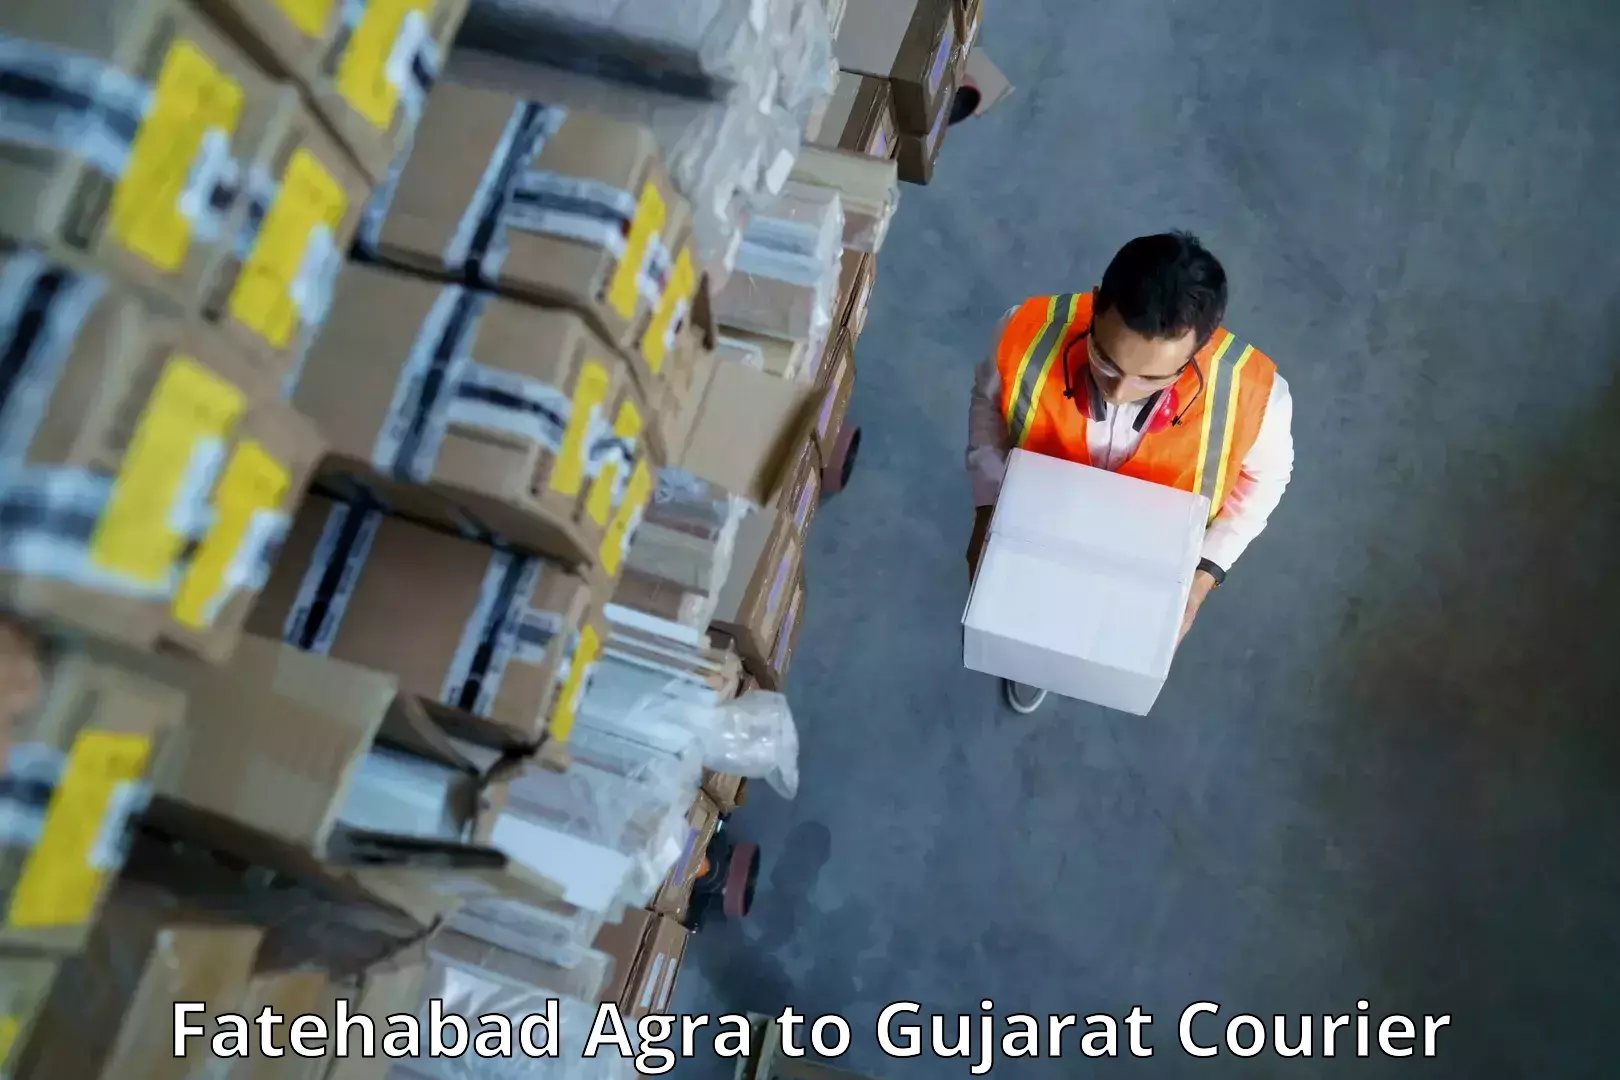 Quality courier partnerships Fatehabad Agra to Anjar